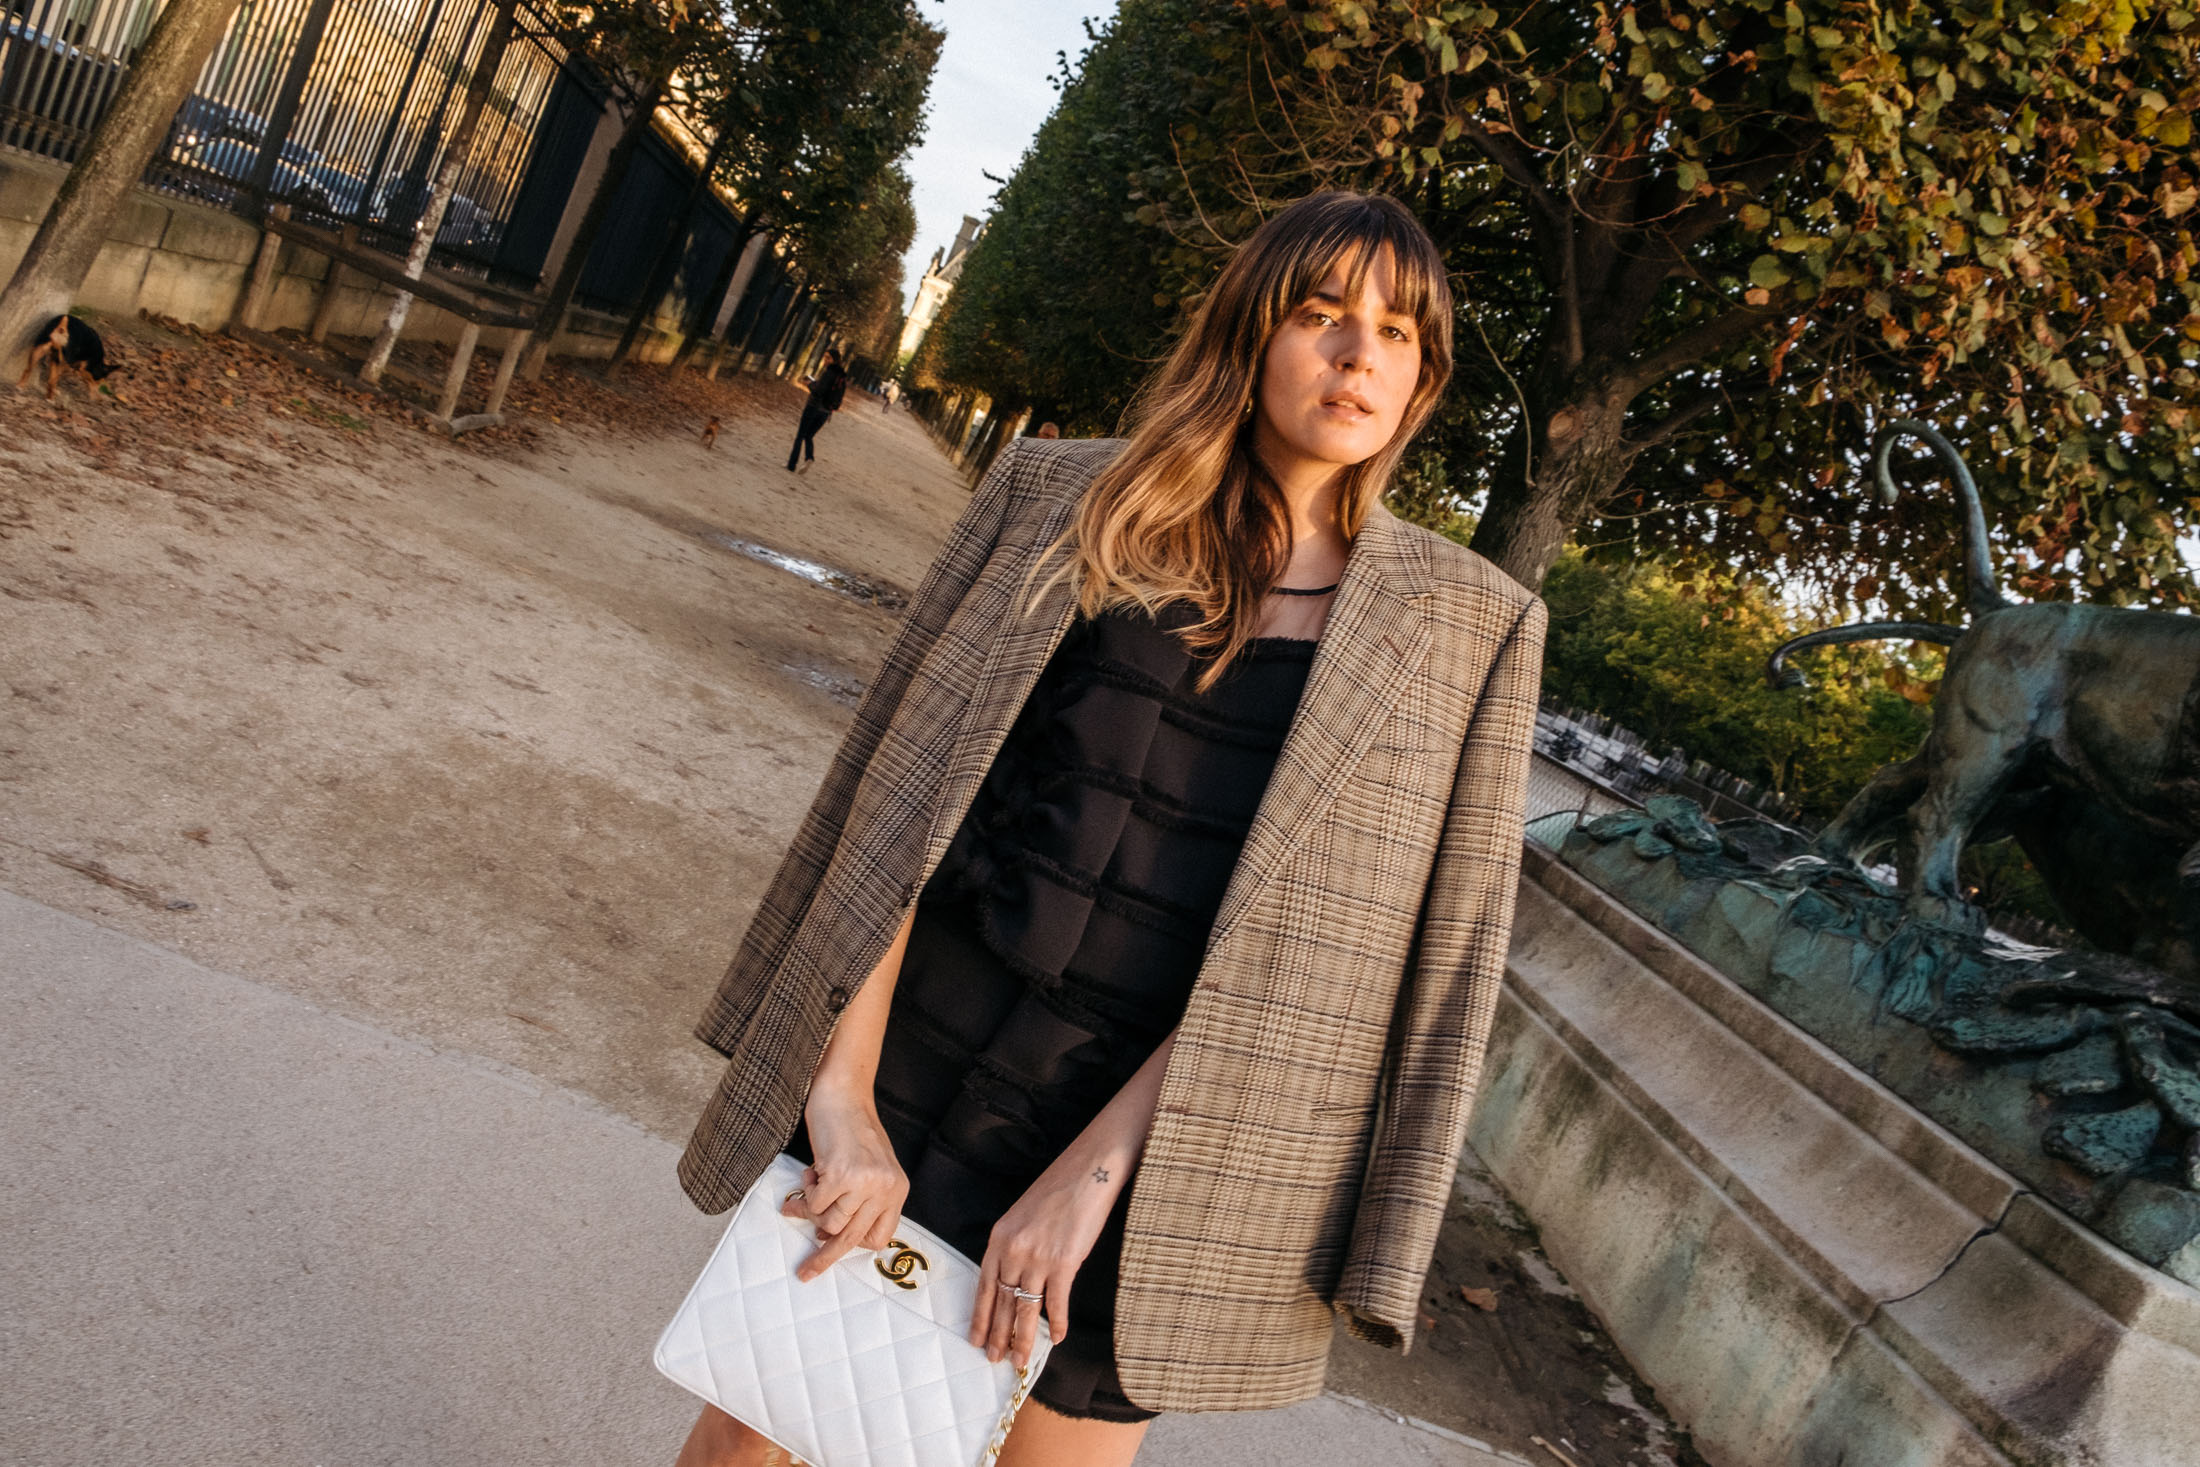 Maristella wearing an oversize blazer with a bow embellished skirt and top set in Paris